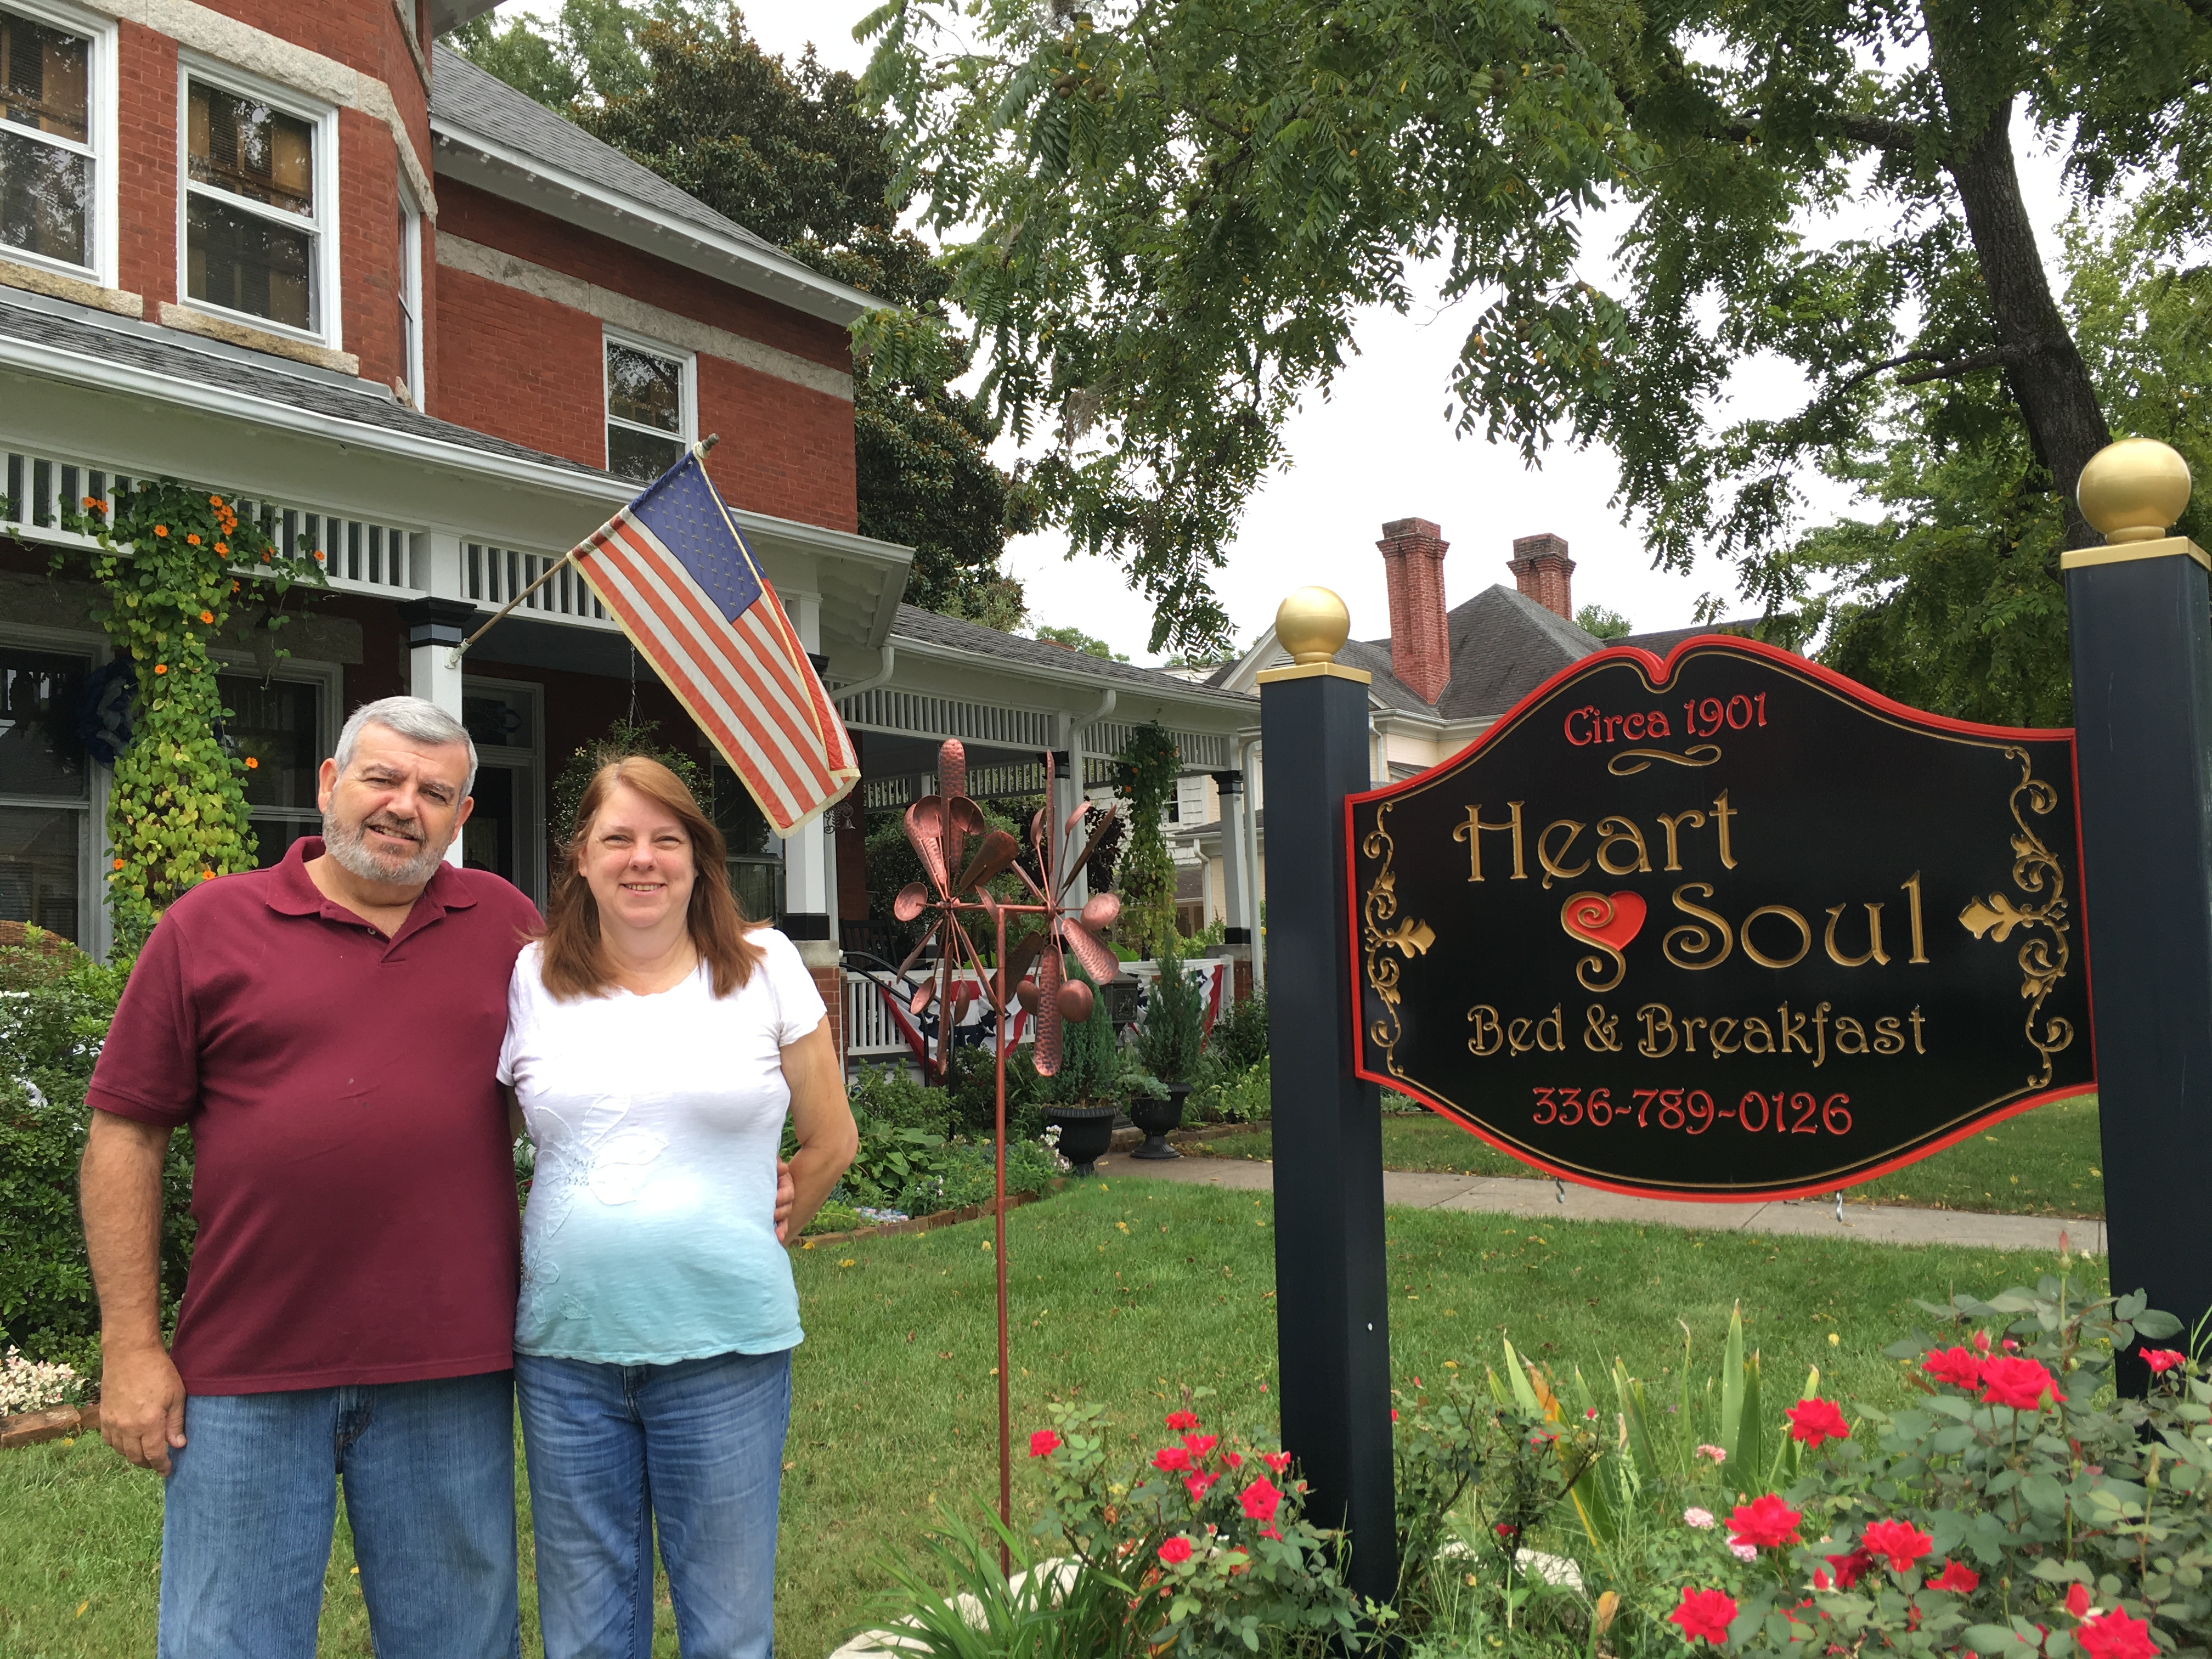 Owners Chris and Pam Bastin Heart & Soul Bed and Breakfast